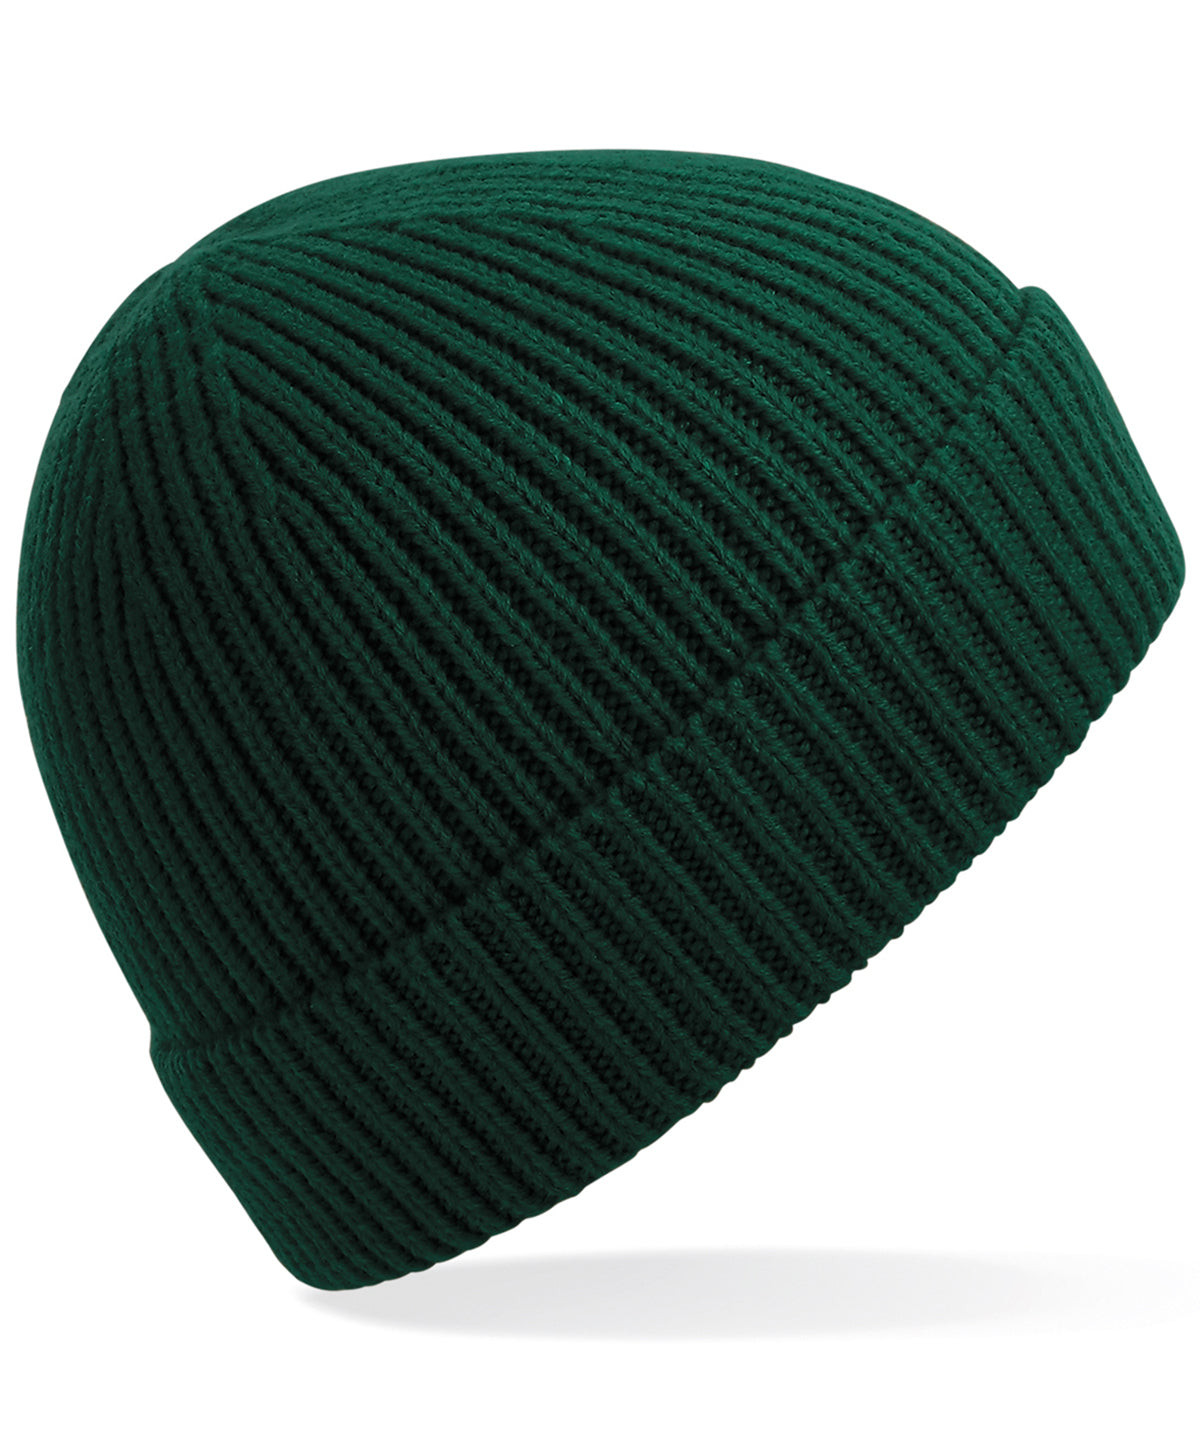 Personalised Hats - Bottle Beechfield Engineered knit ribbed beanie